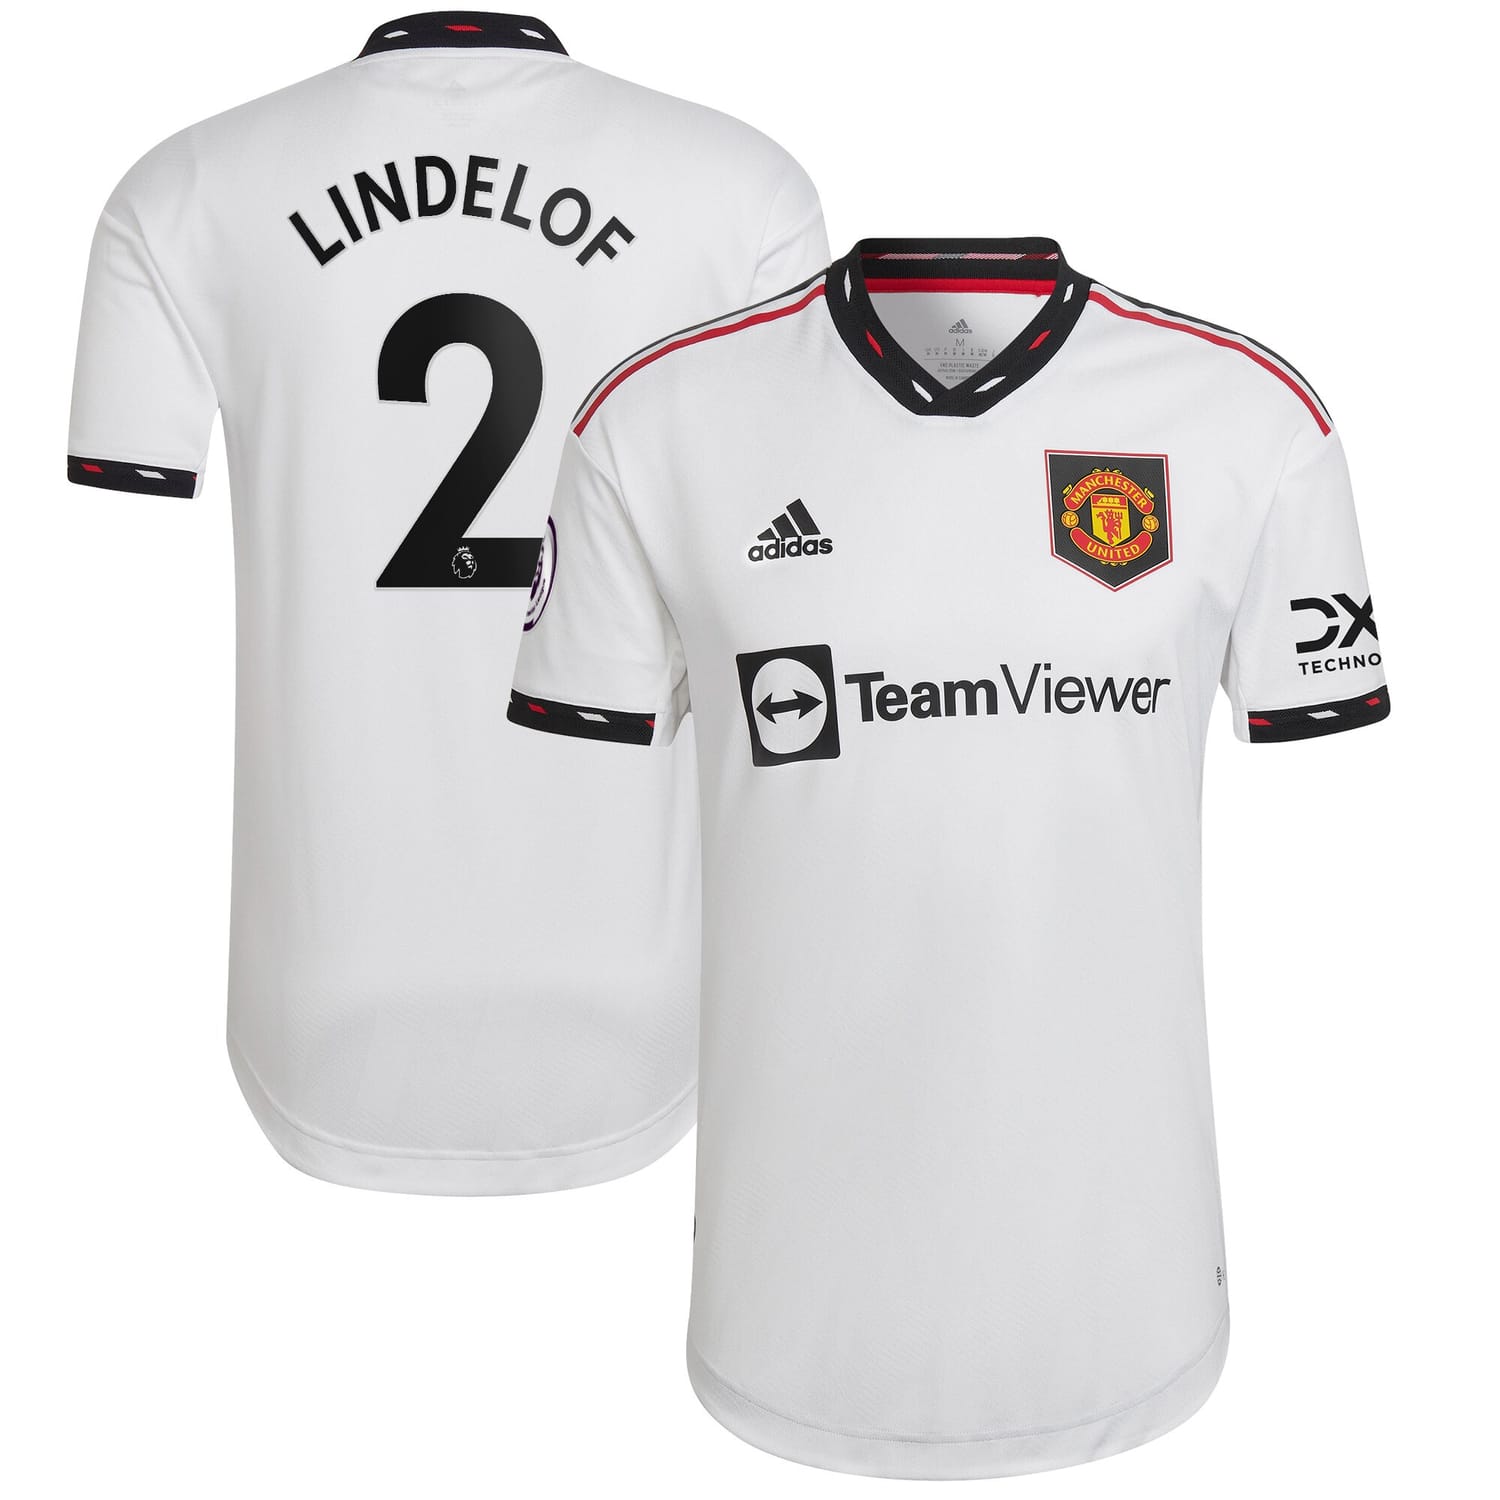 Premier League Manchester United Away Authentic Jersey Shirt White 2022-23 player Victor Lindelöf printing for Men